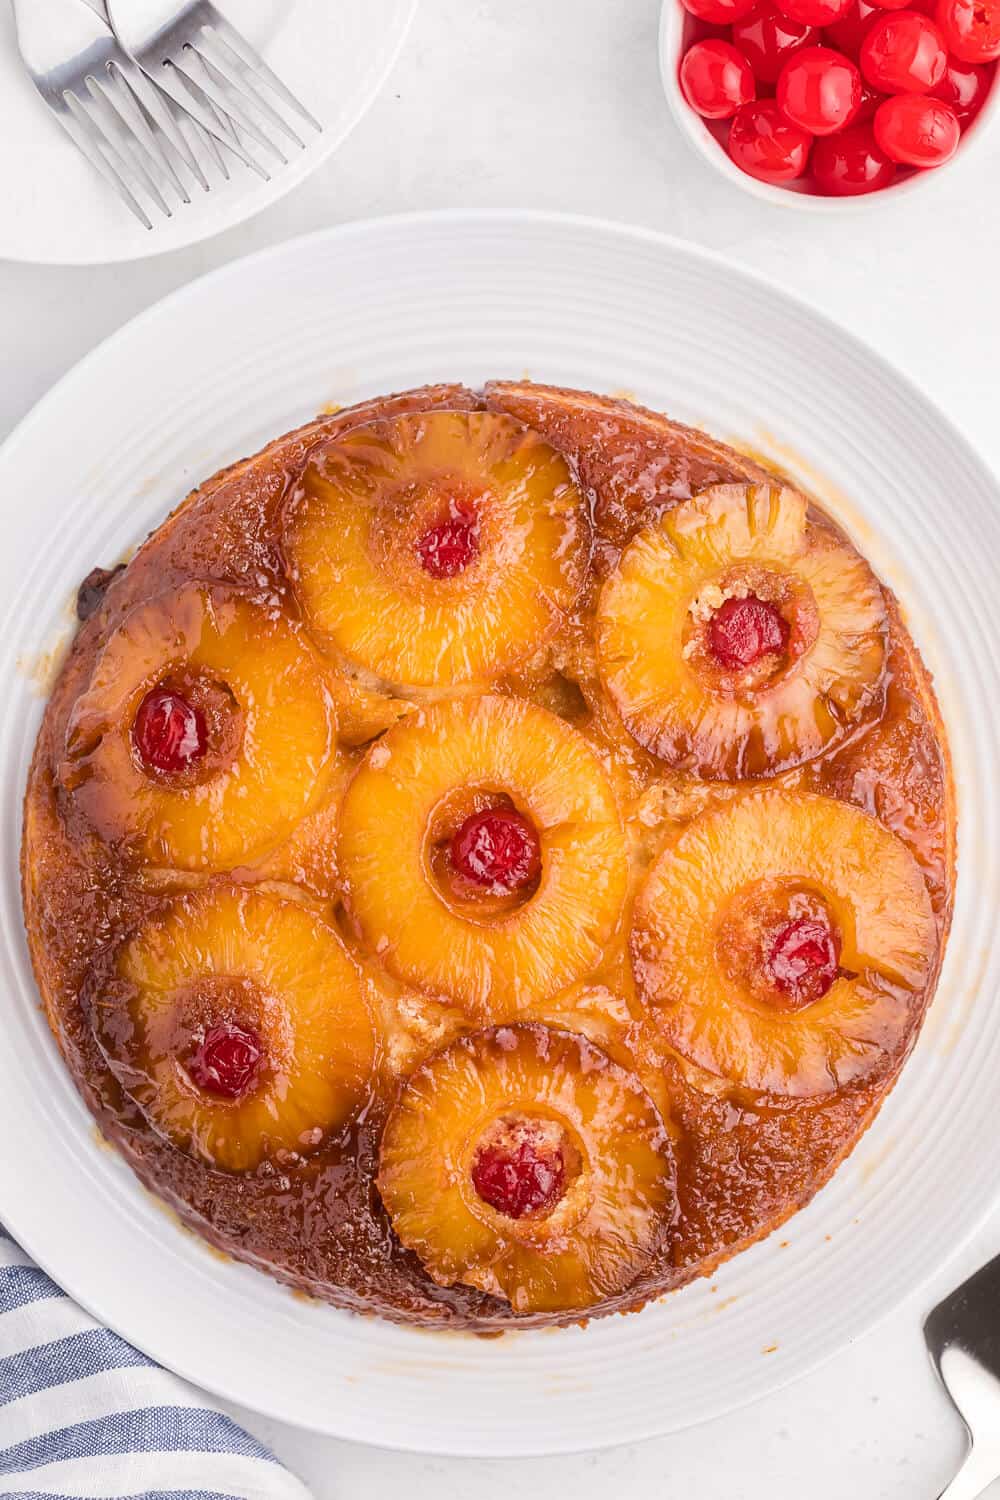 Pineapple upside down cake on a white plate